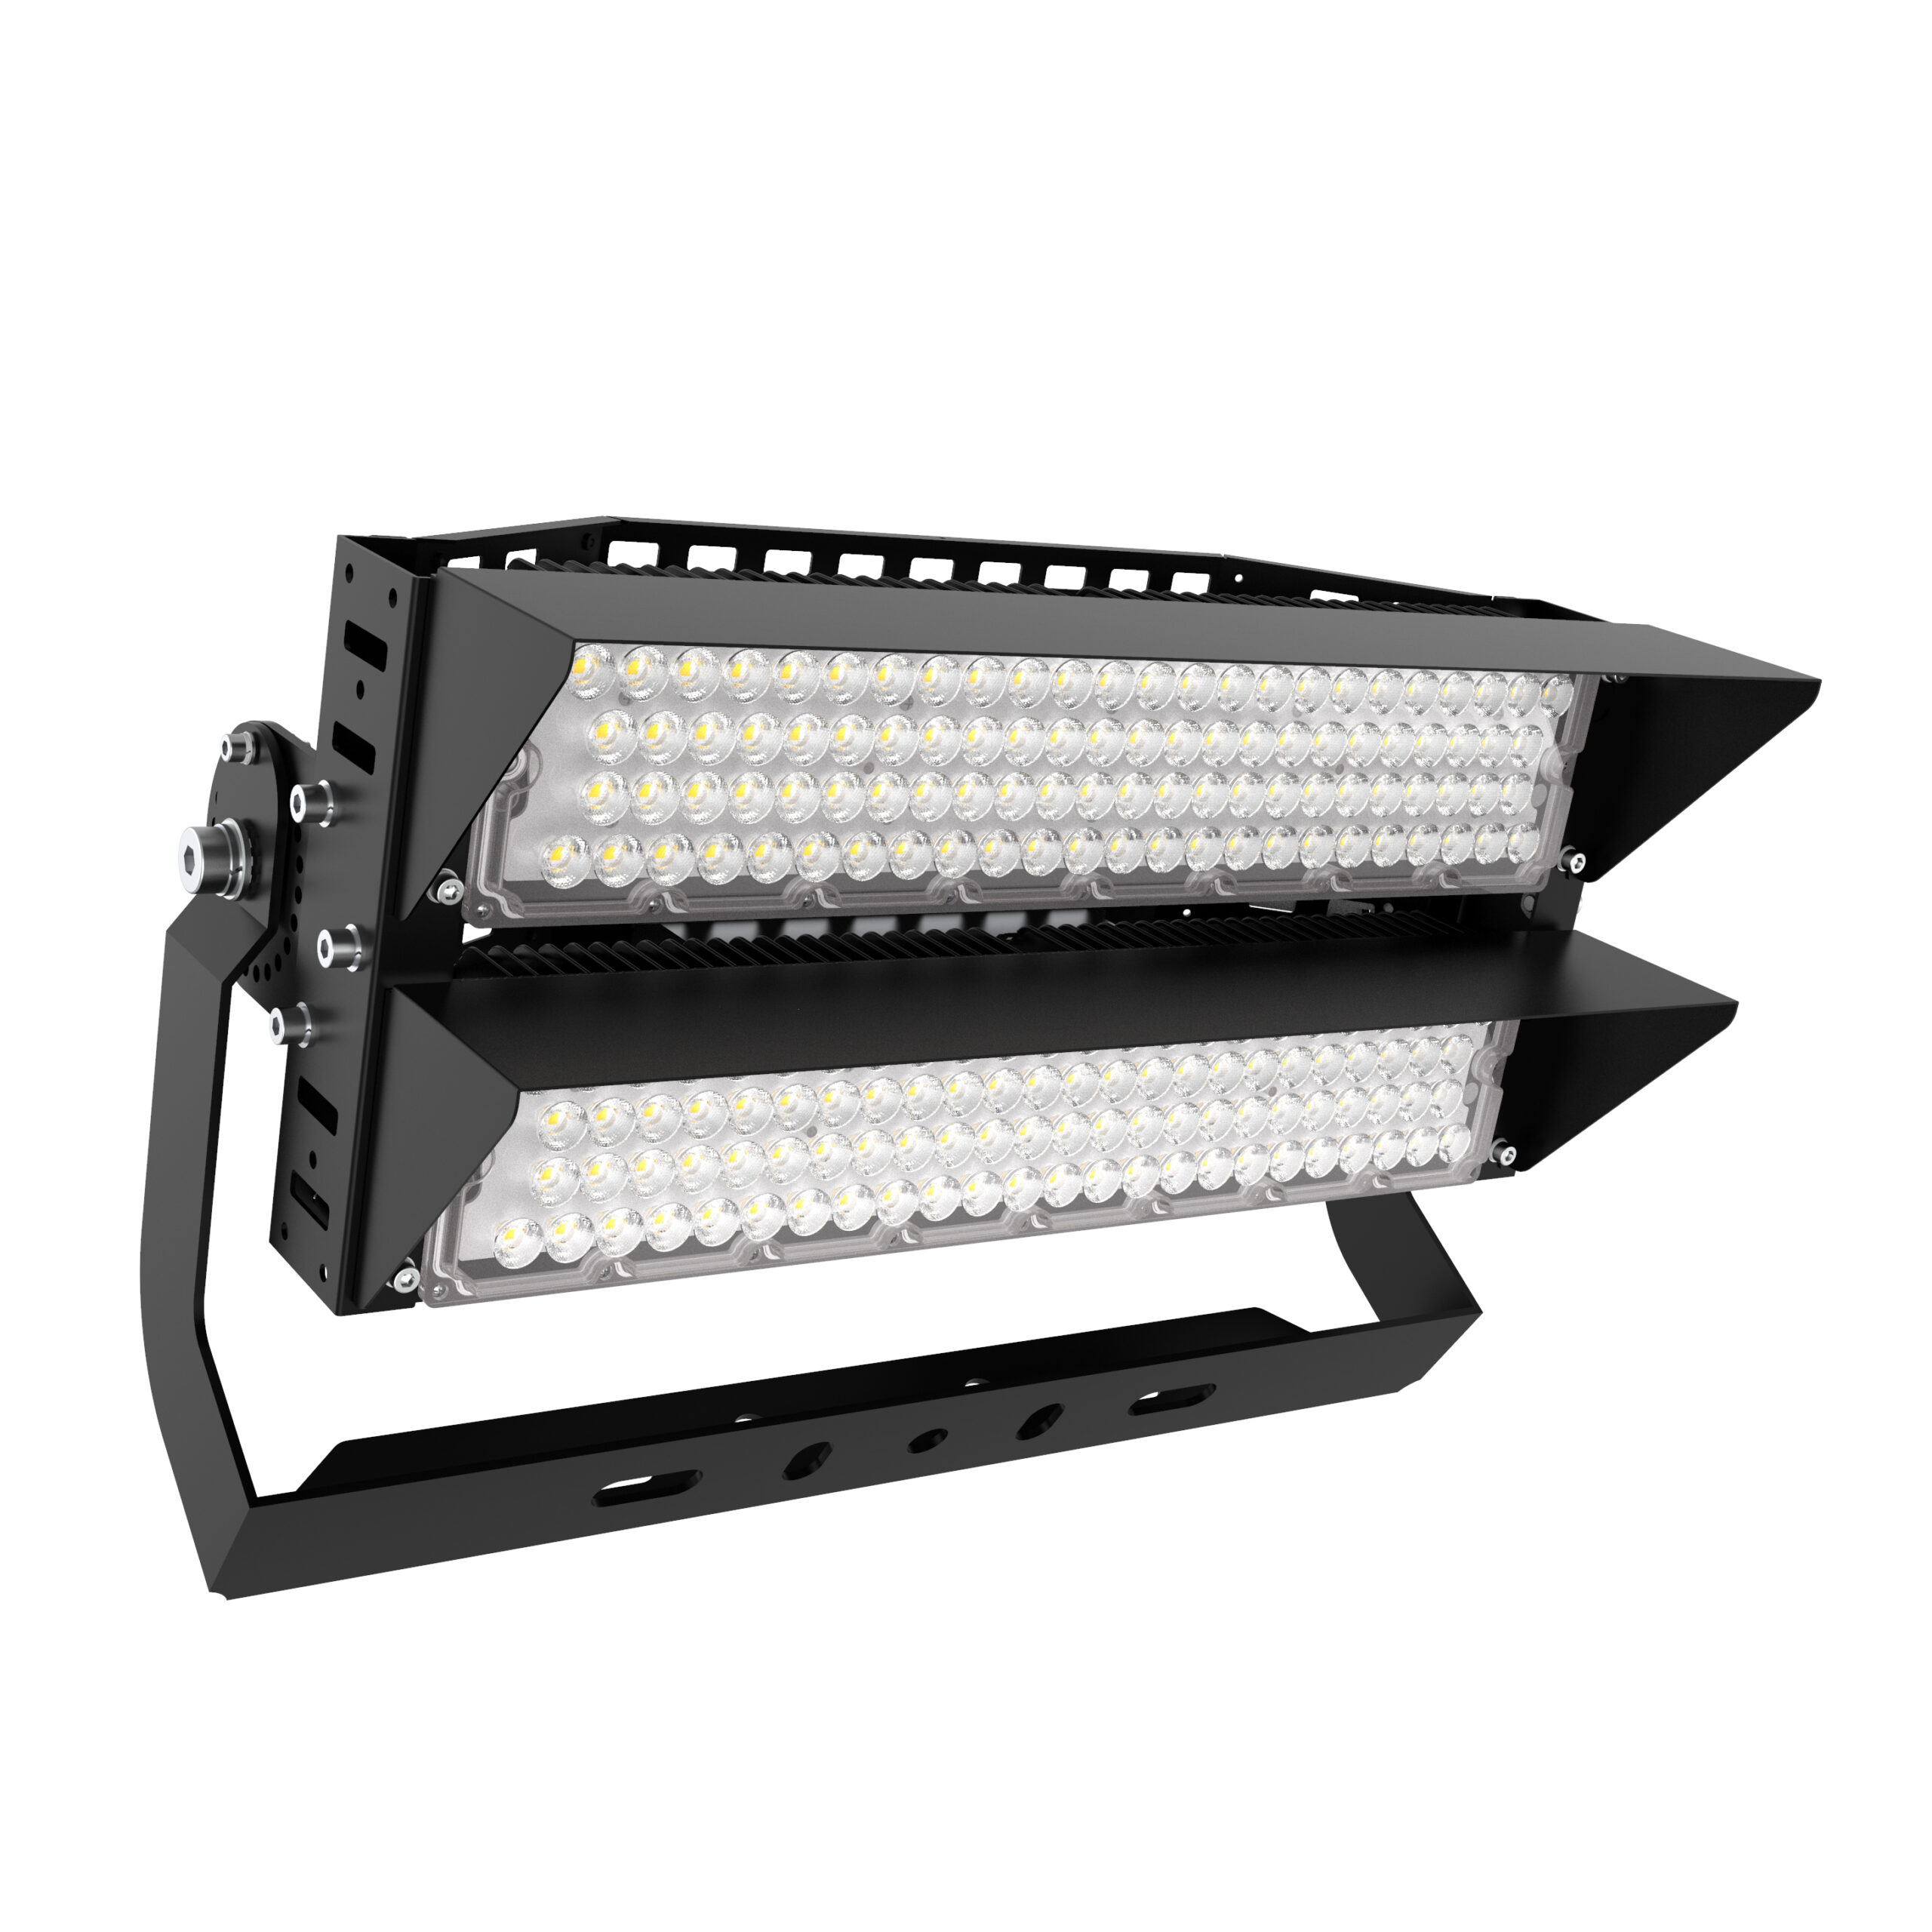 Stadium Lights For Backyard Square Shape with excellent heat dissipation (1)